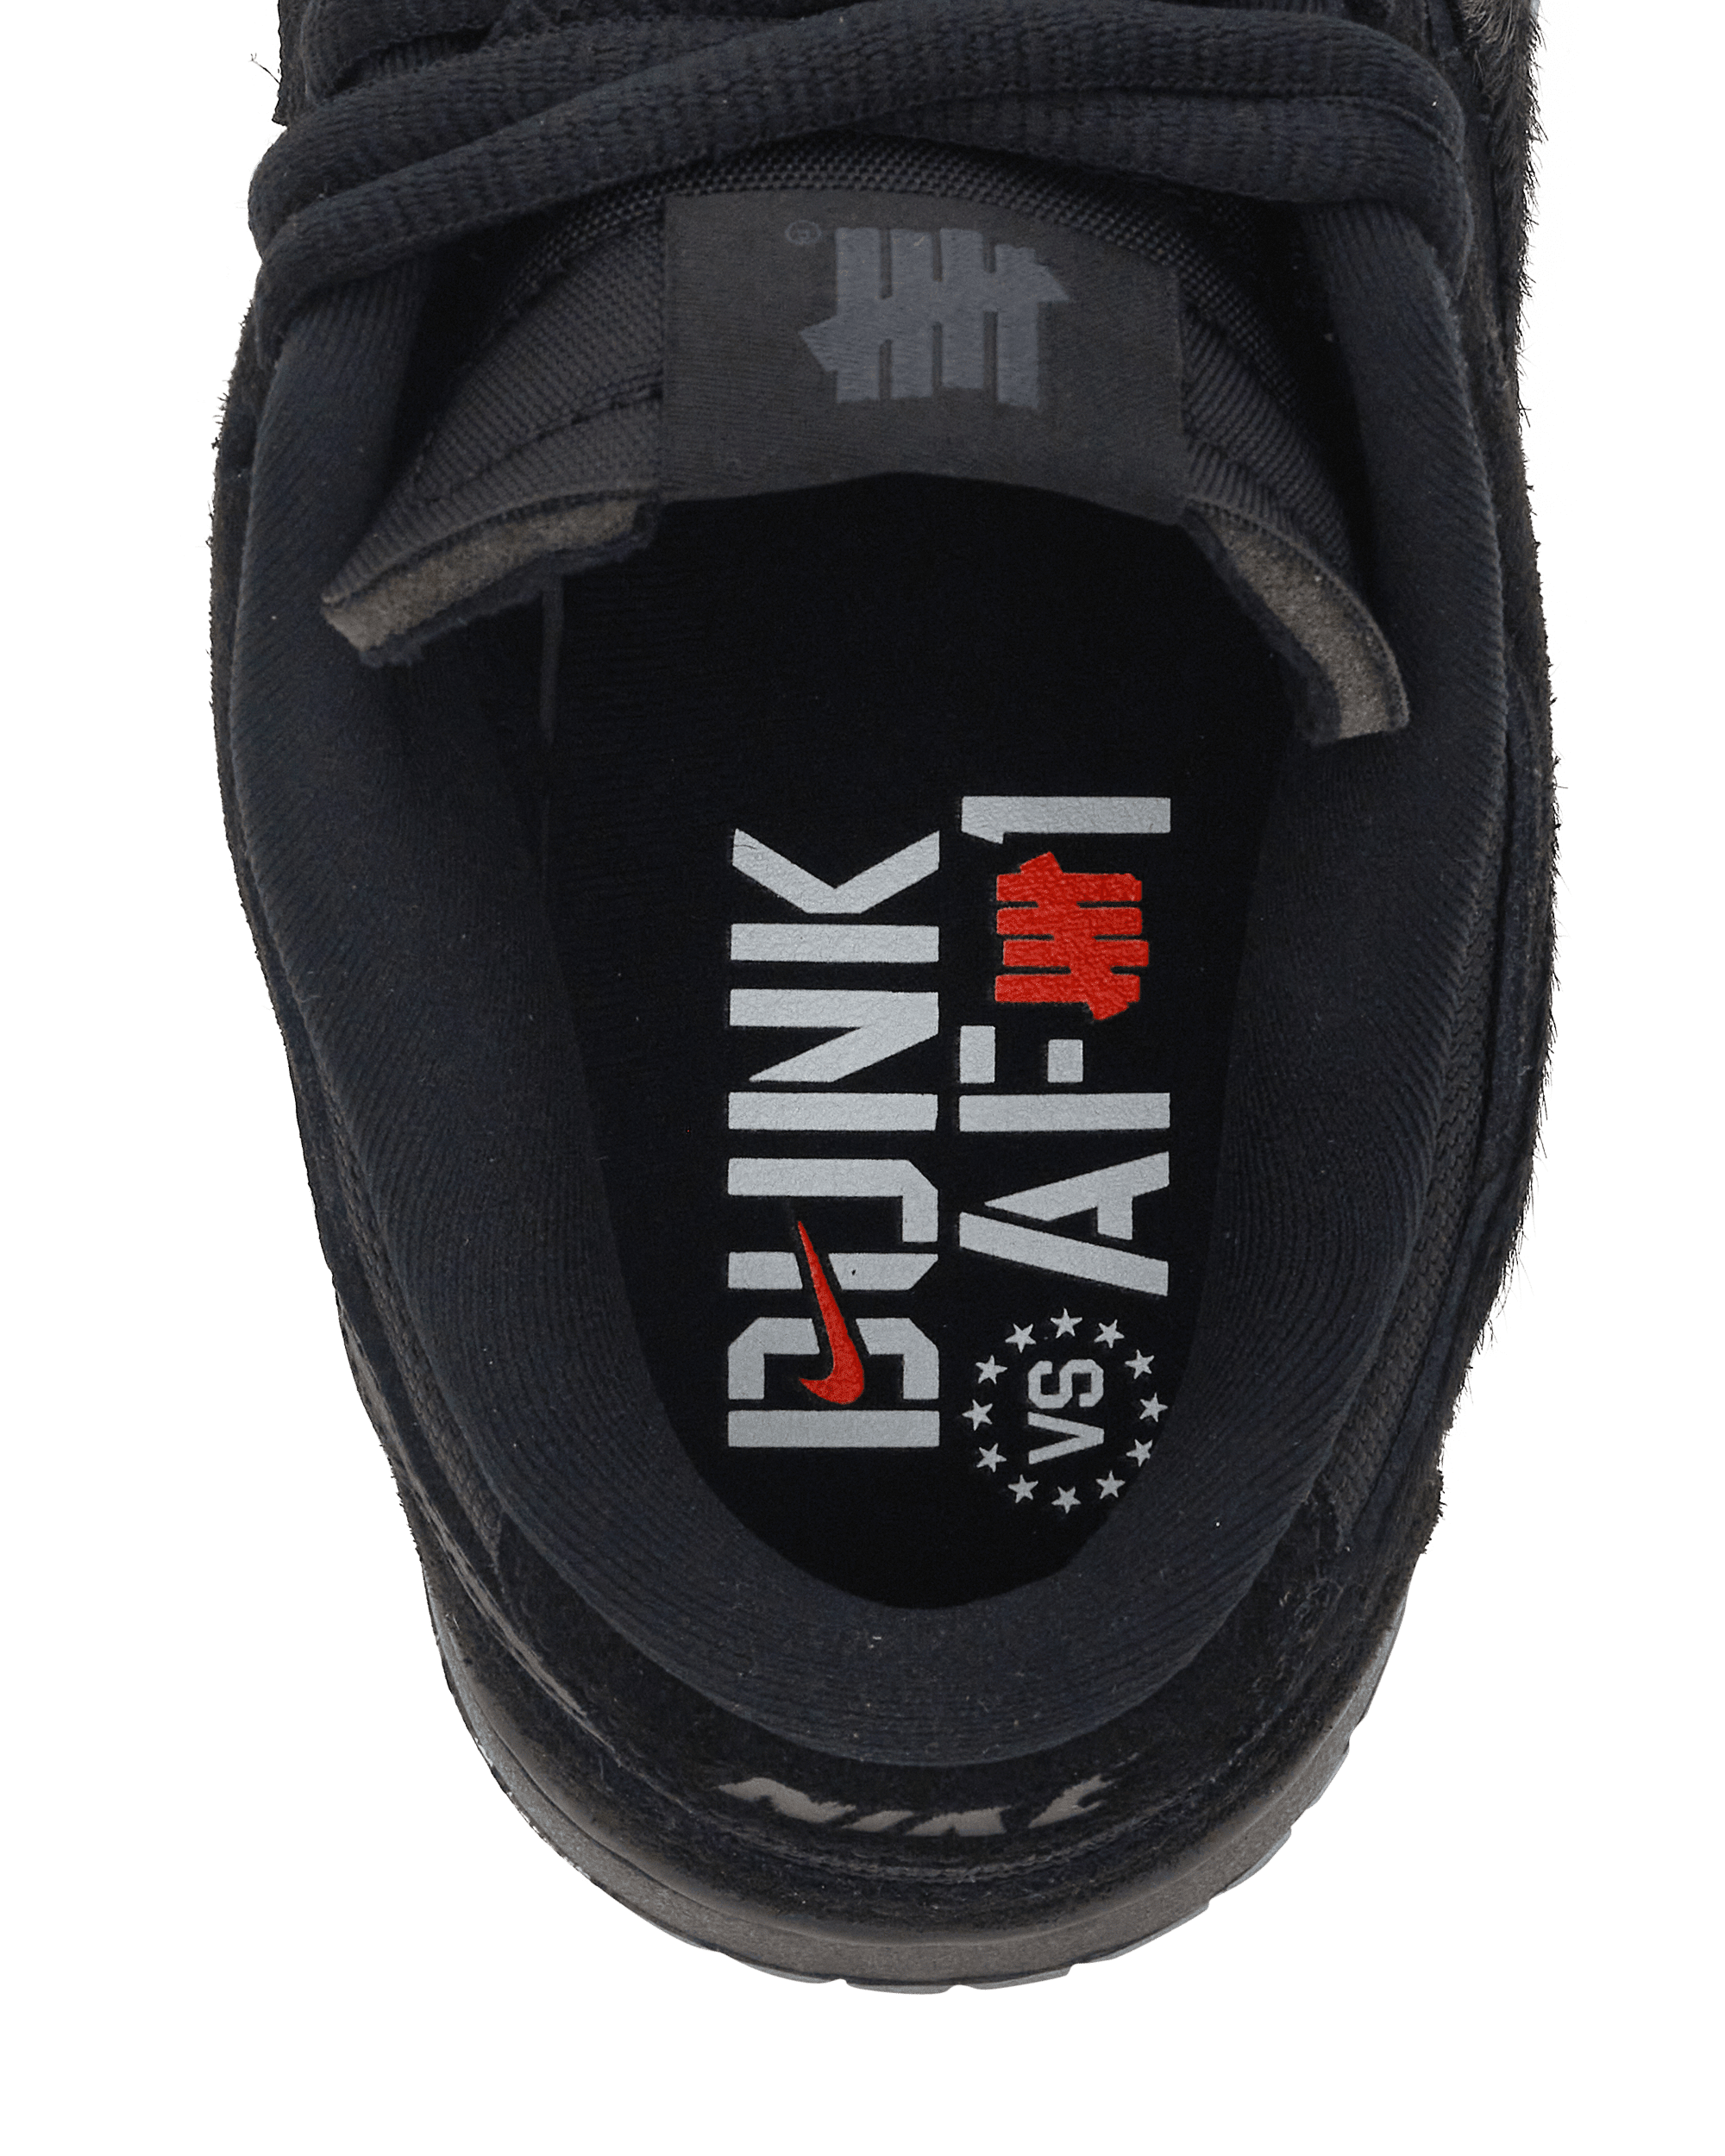 Nike Special Project Dunk Low Sp Black/Black Sneakers Low DO9329-001